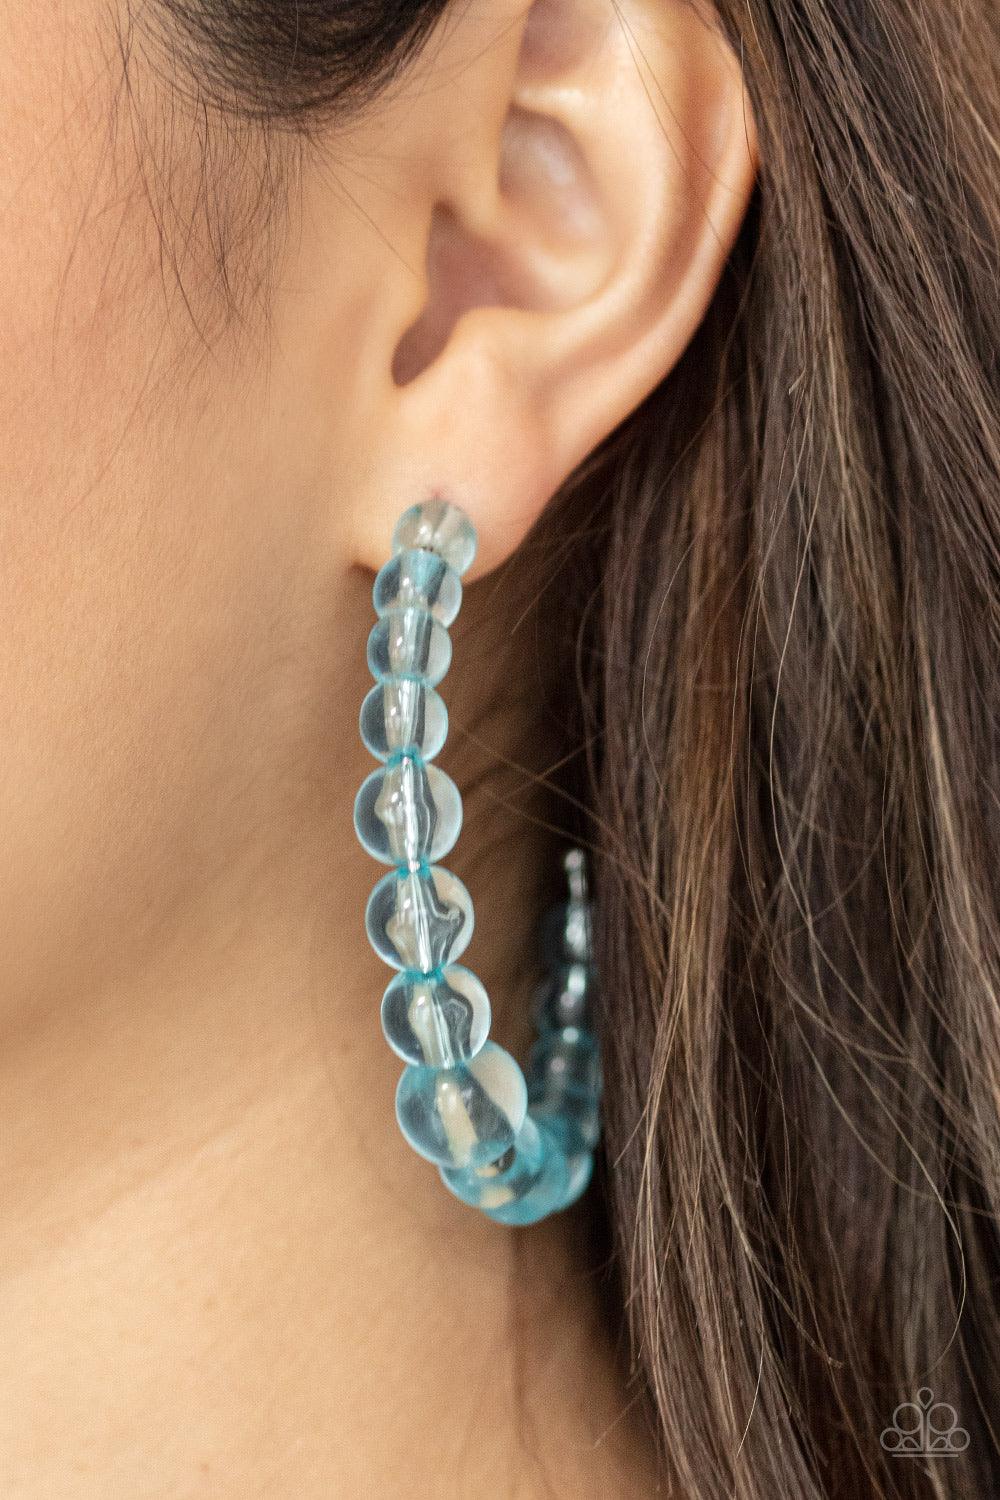 Paparazzi Accessories In The Clear - Blue Gradually increasing in size at the center, a glassy collection of Cerulean beads are threaded along an oversized hoop for a bubbly effect. Earring attaches to a standard post fitting. Hoop measures approximately